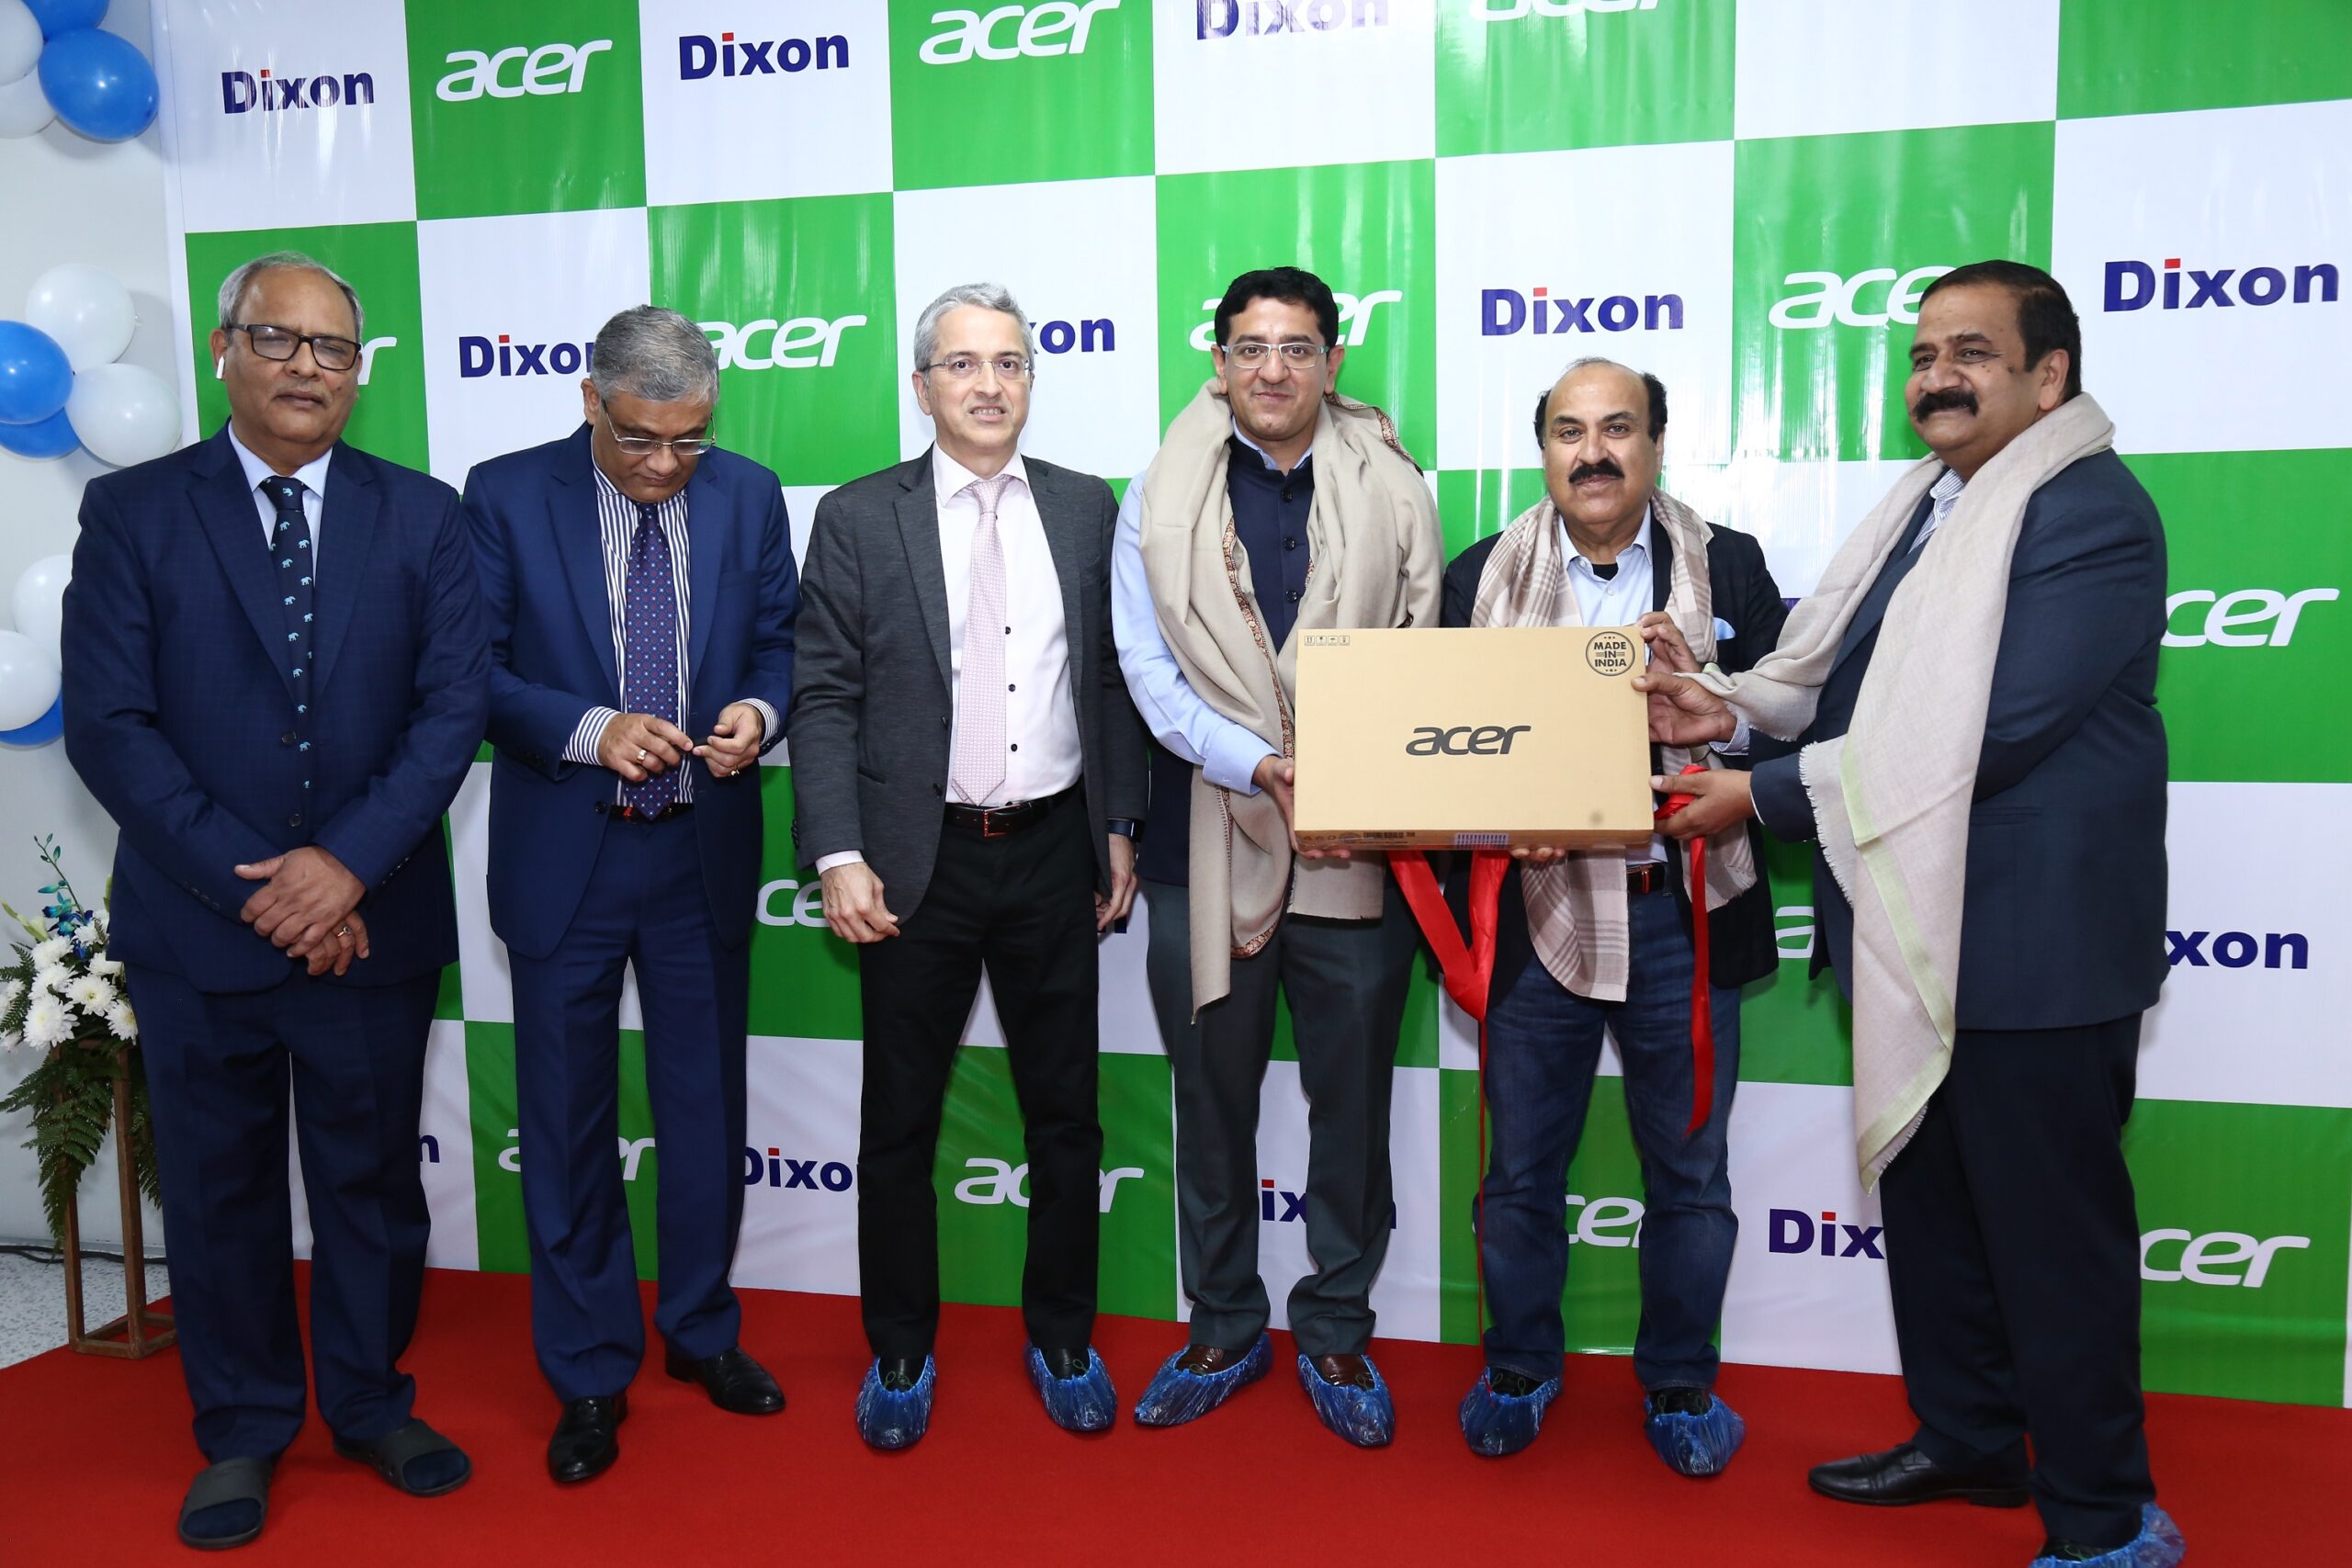 Acer India and Dixon Technologies